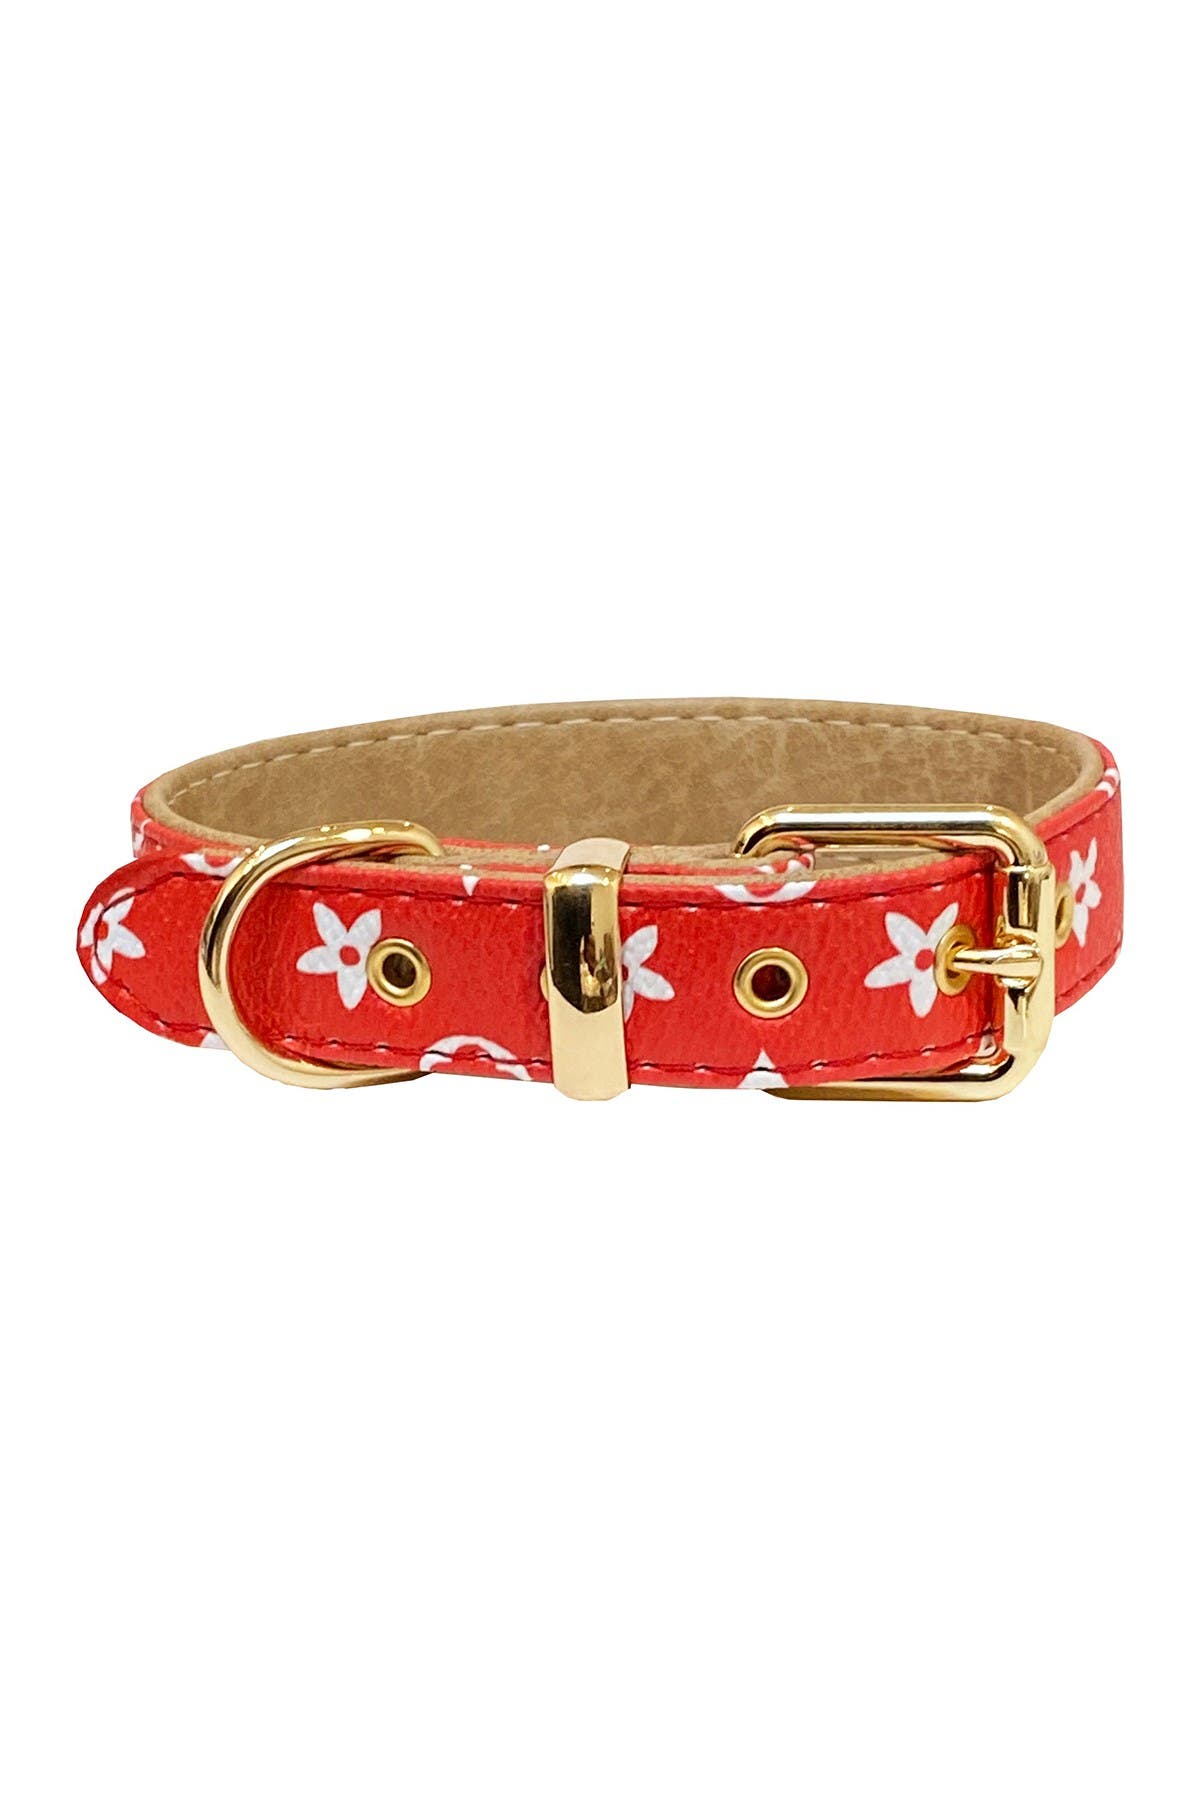 Dogs Of Glamour Lauren Luxury Collar In Red